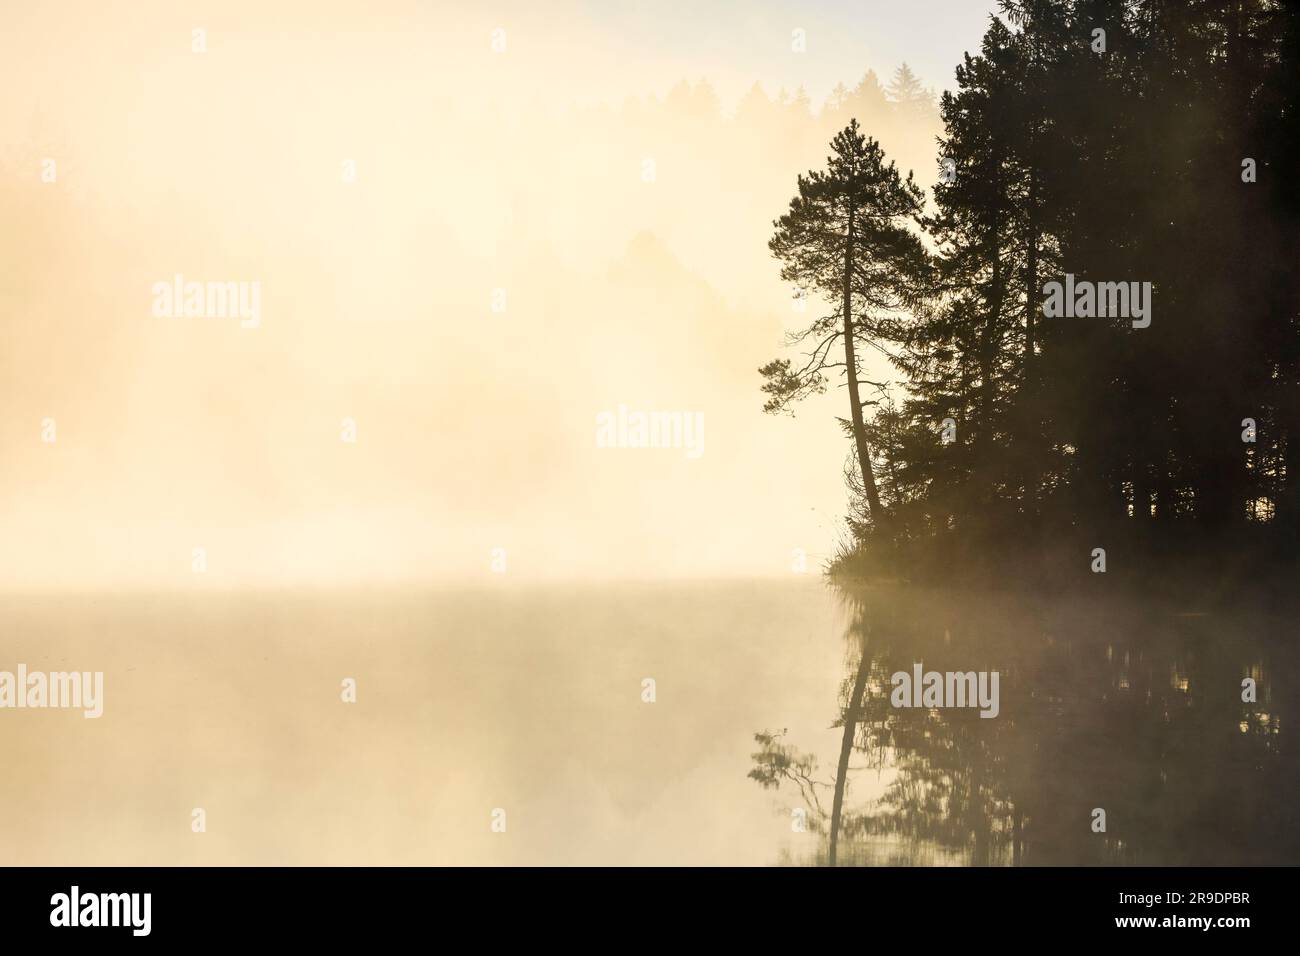 Pine tree and forest silhouetted at sunrise backlit with fog over the moorland lake Etang de la GruÃ¨re in the canton of Jura, Switzerland Stock Photo